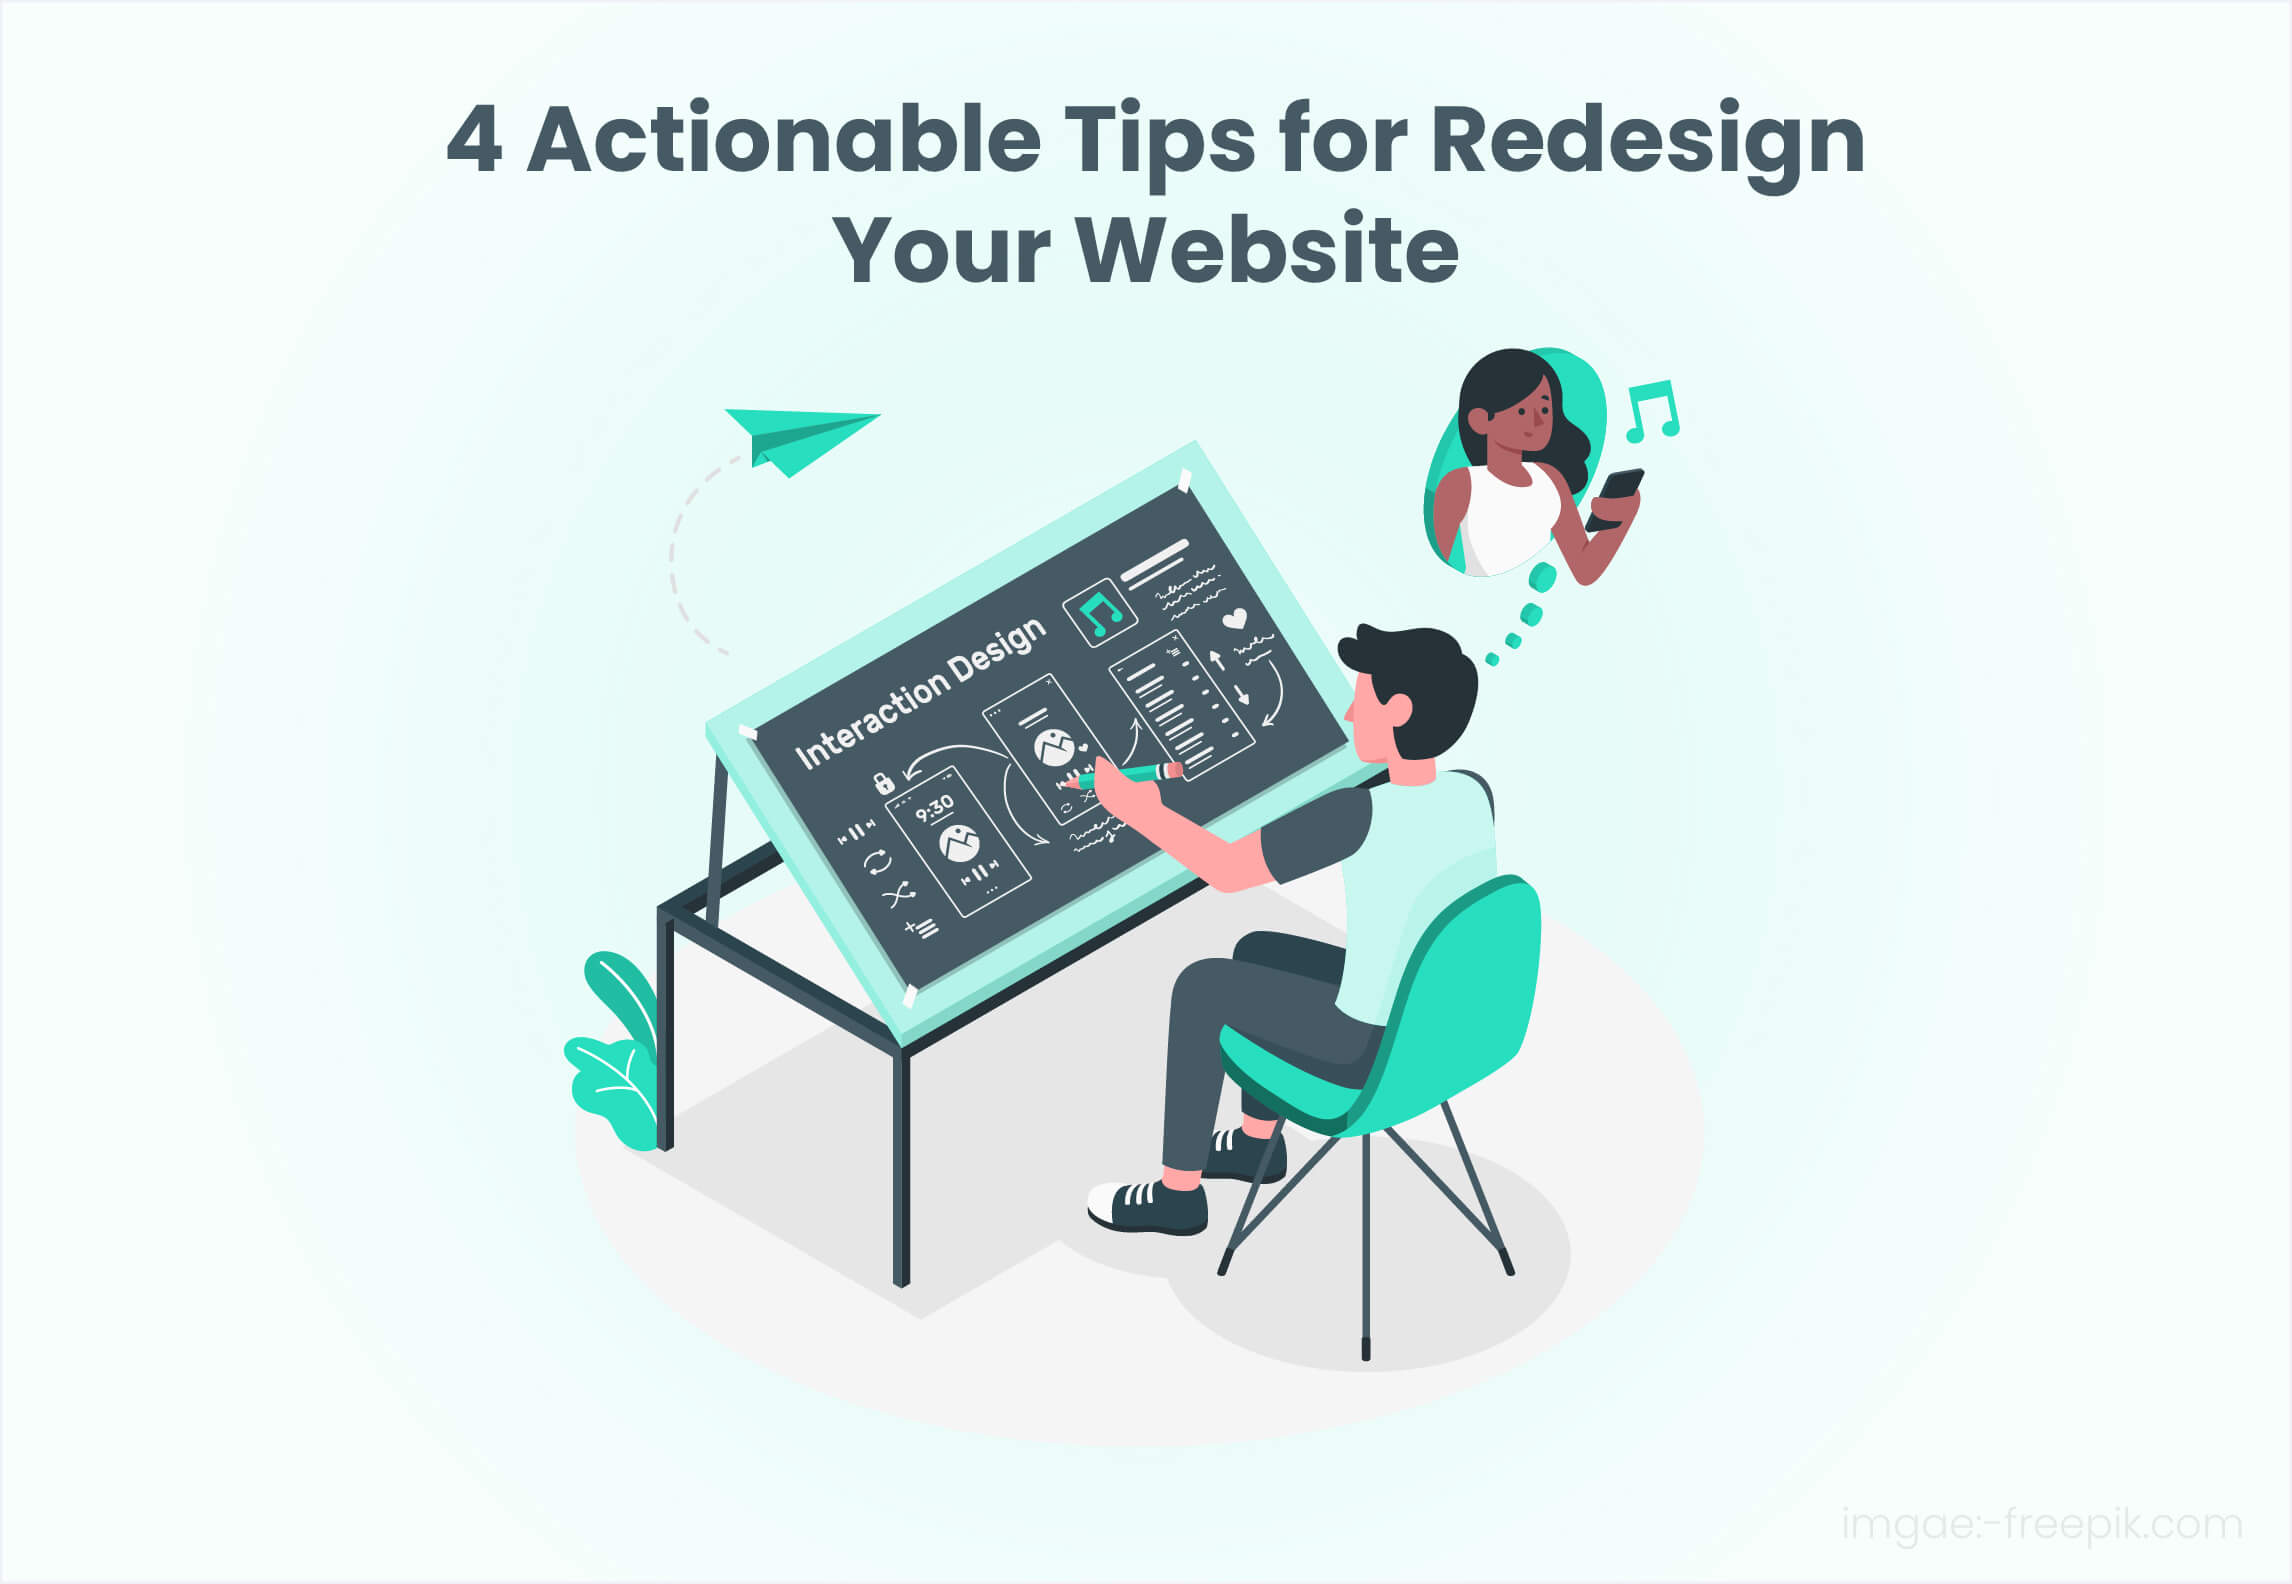 Top 4 Actionable Tips for Redesigning Your Website